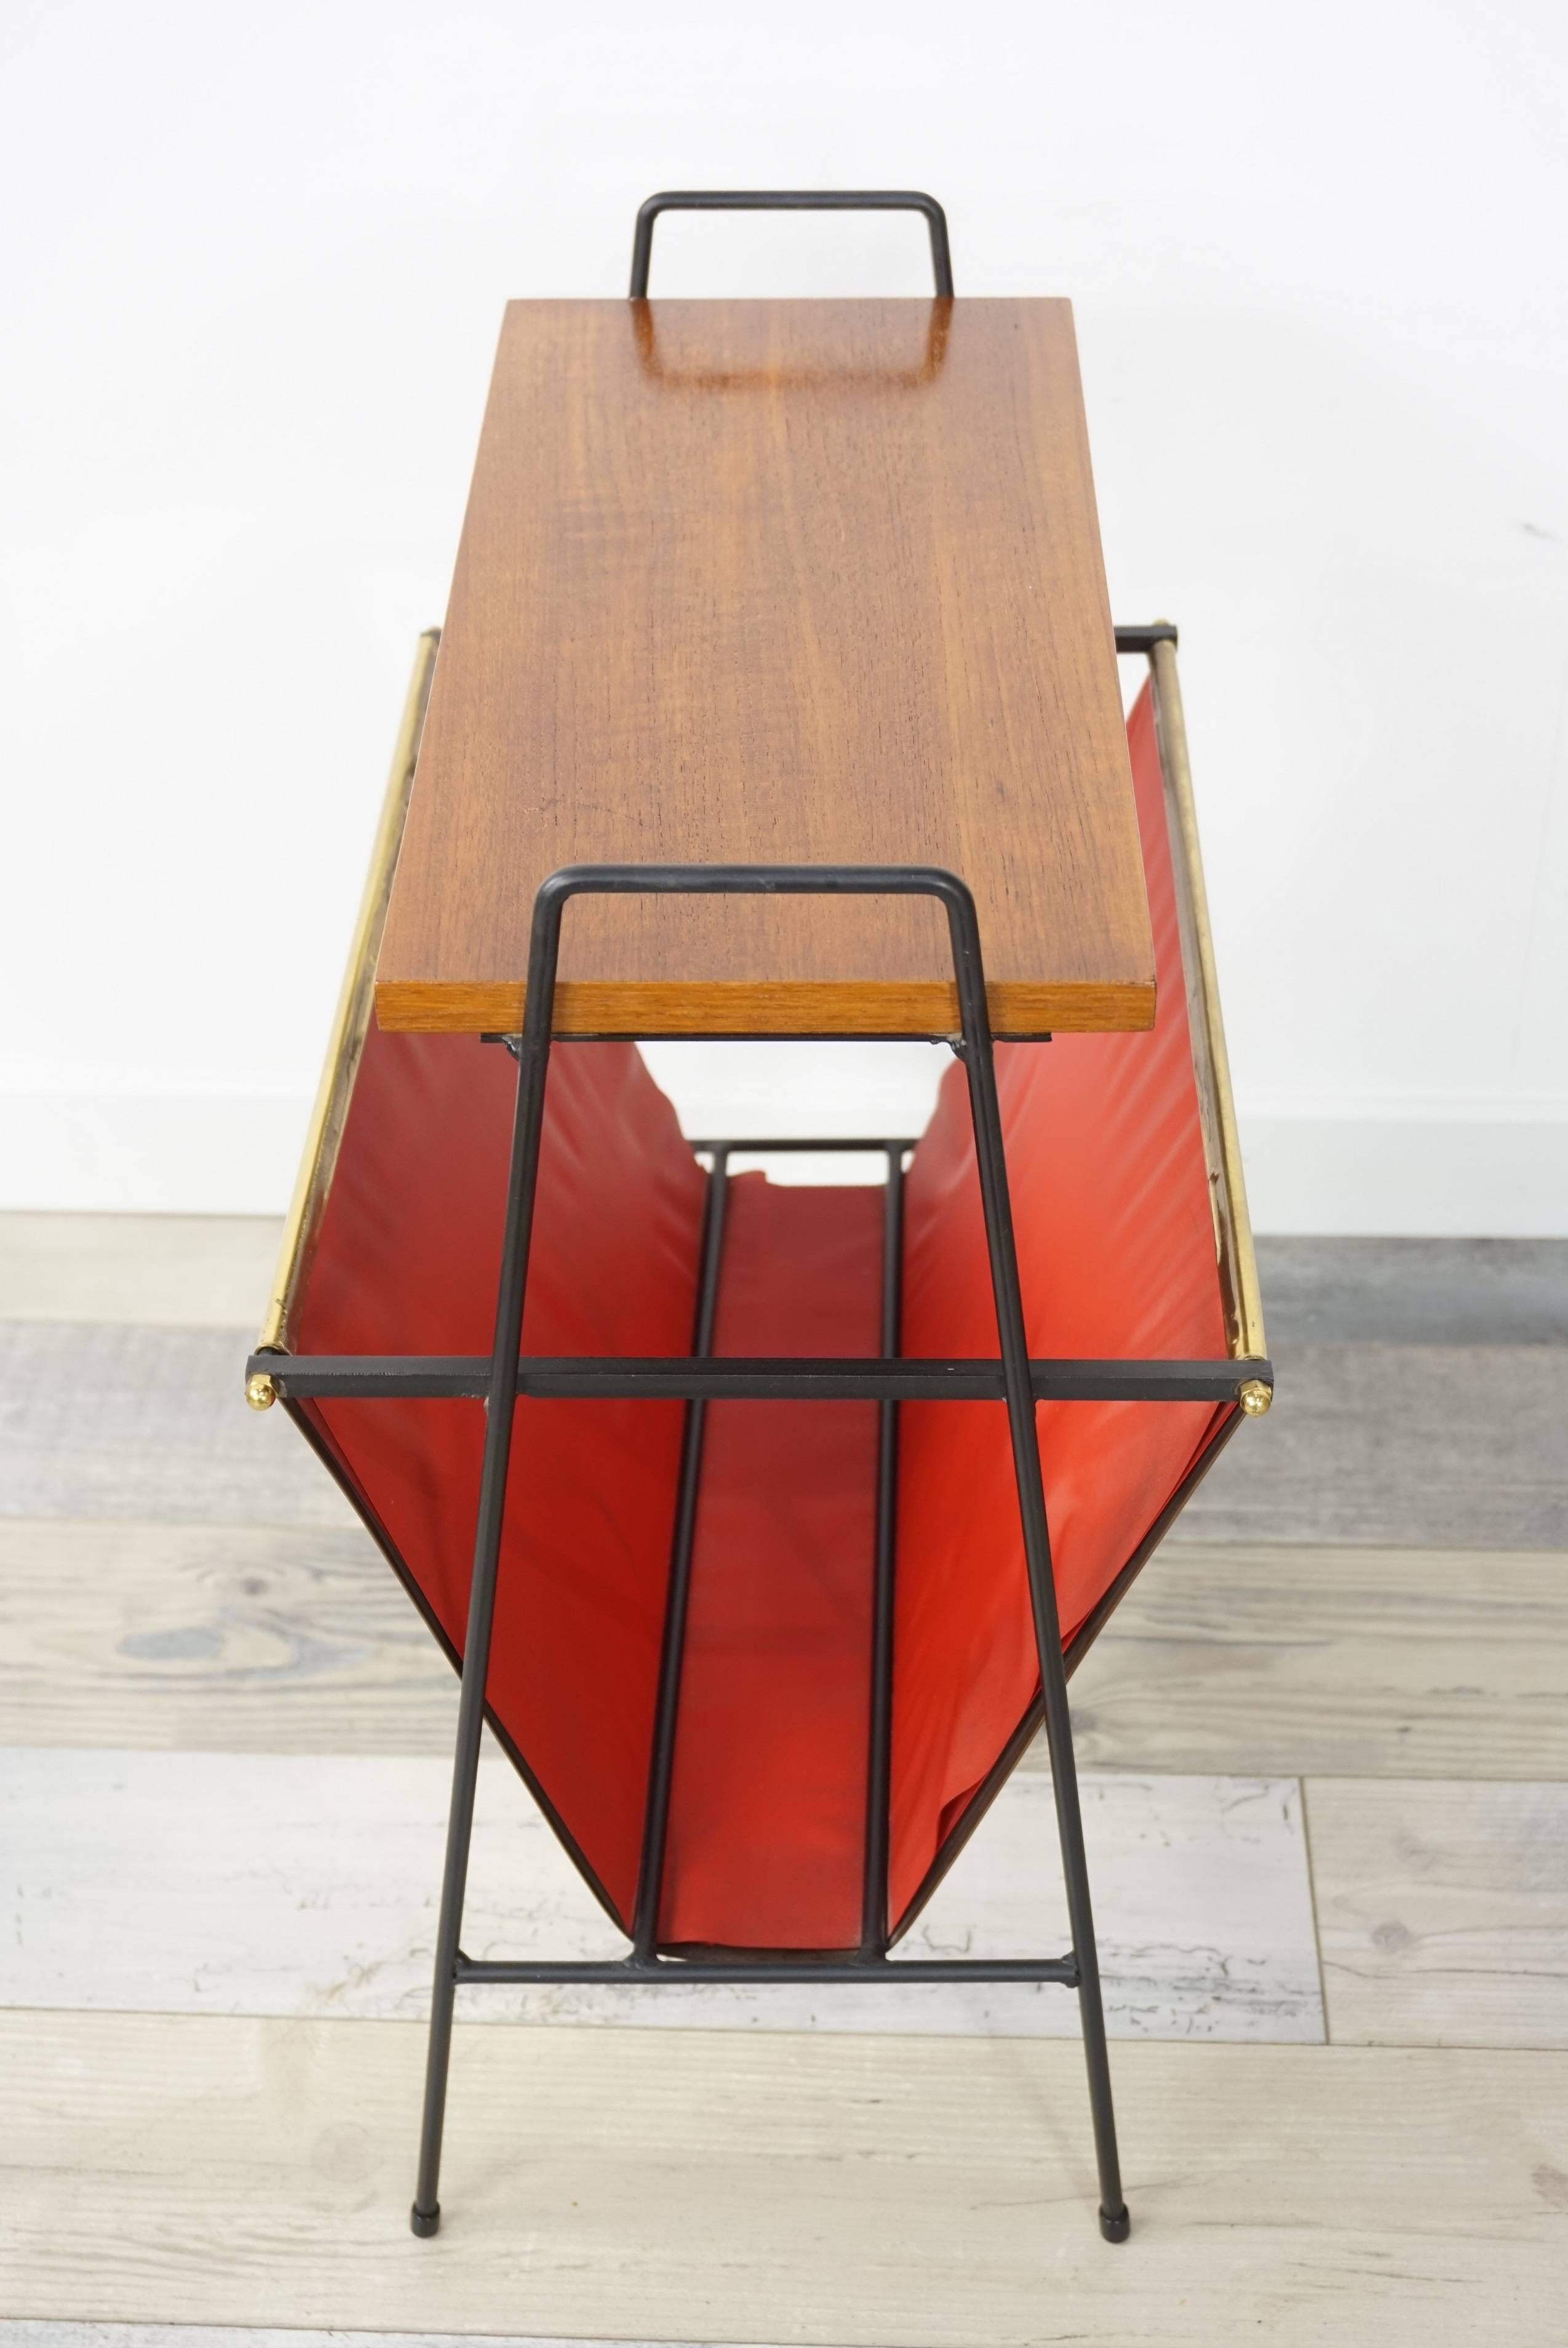 Belgian Copper and Wooden Teak Side Table with Magazine Rack from the 1950s